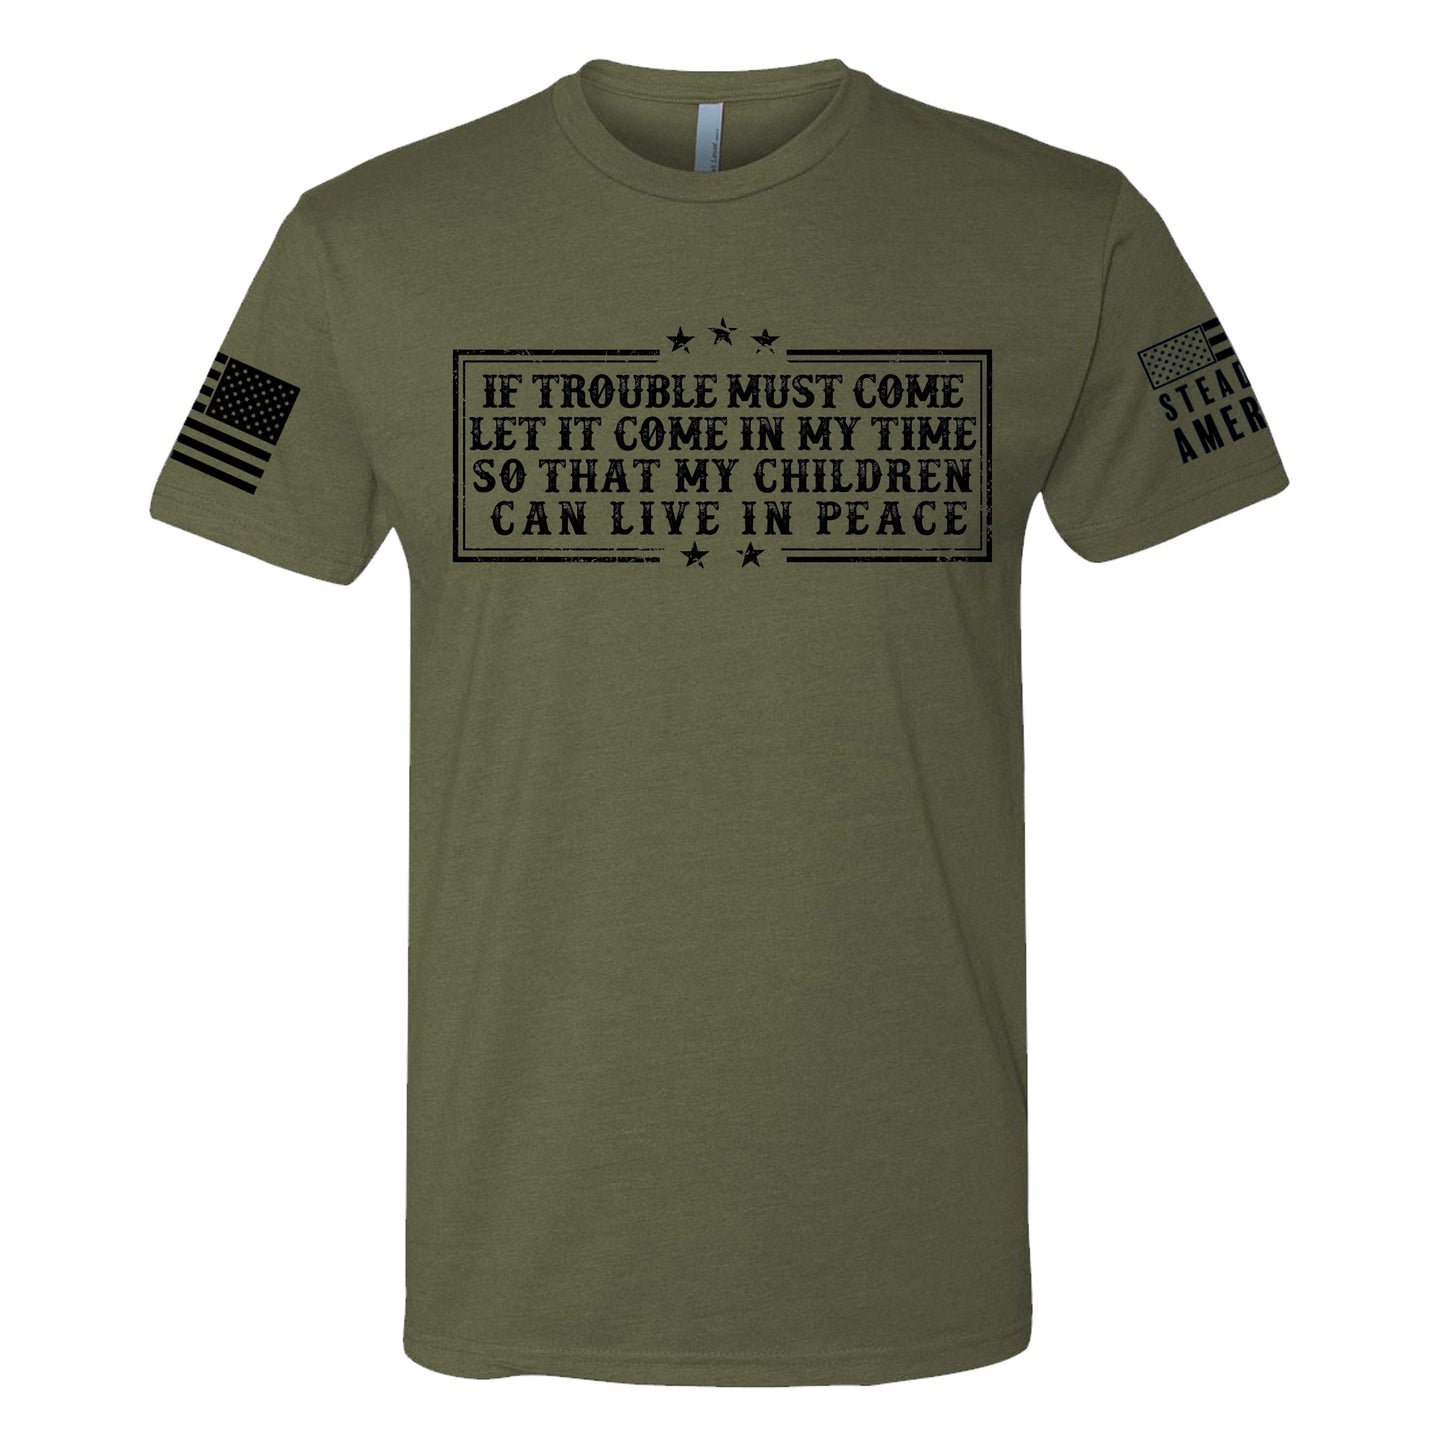 If Trouble Must Come, Let It Come In My Time T-Shirt